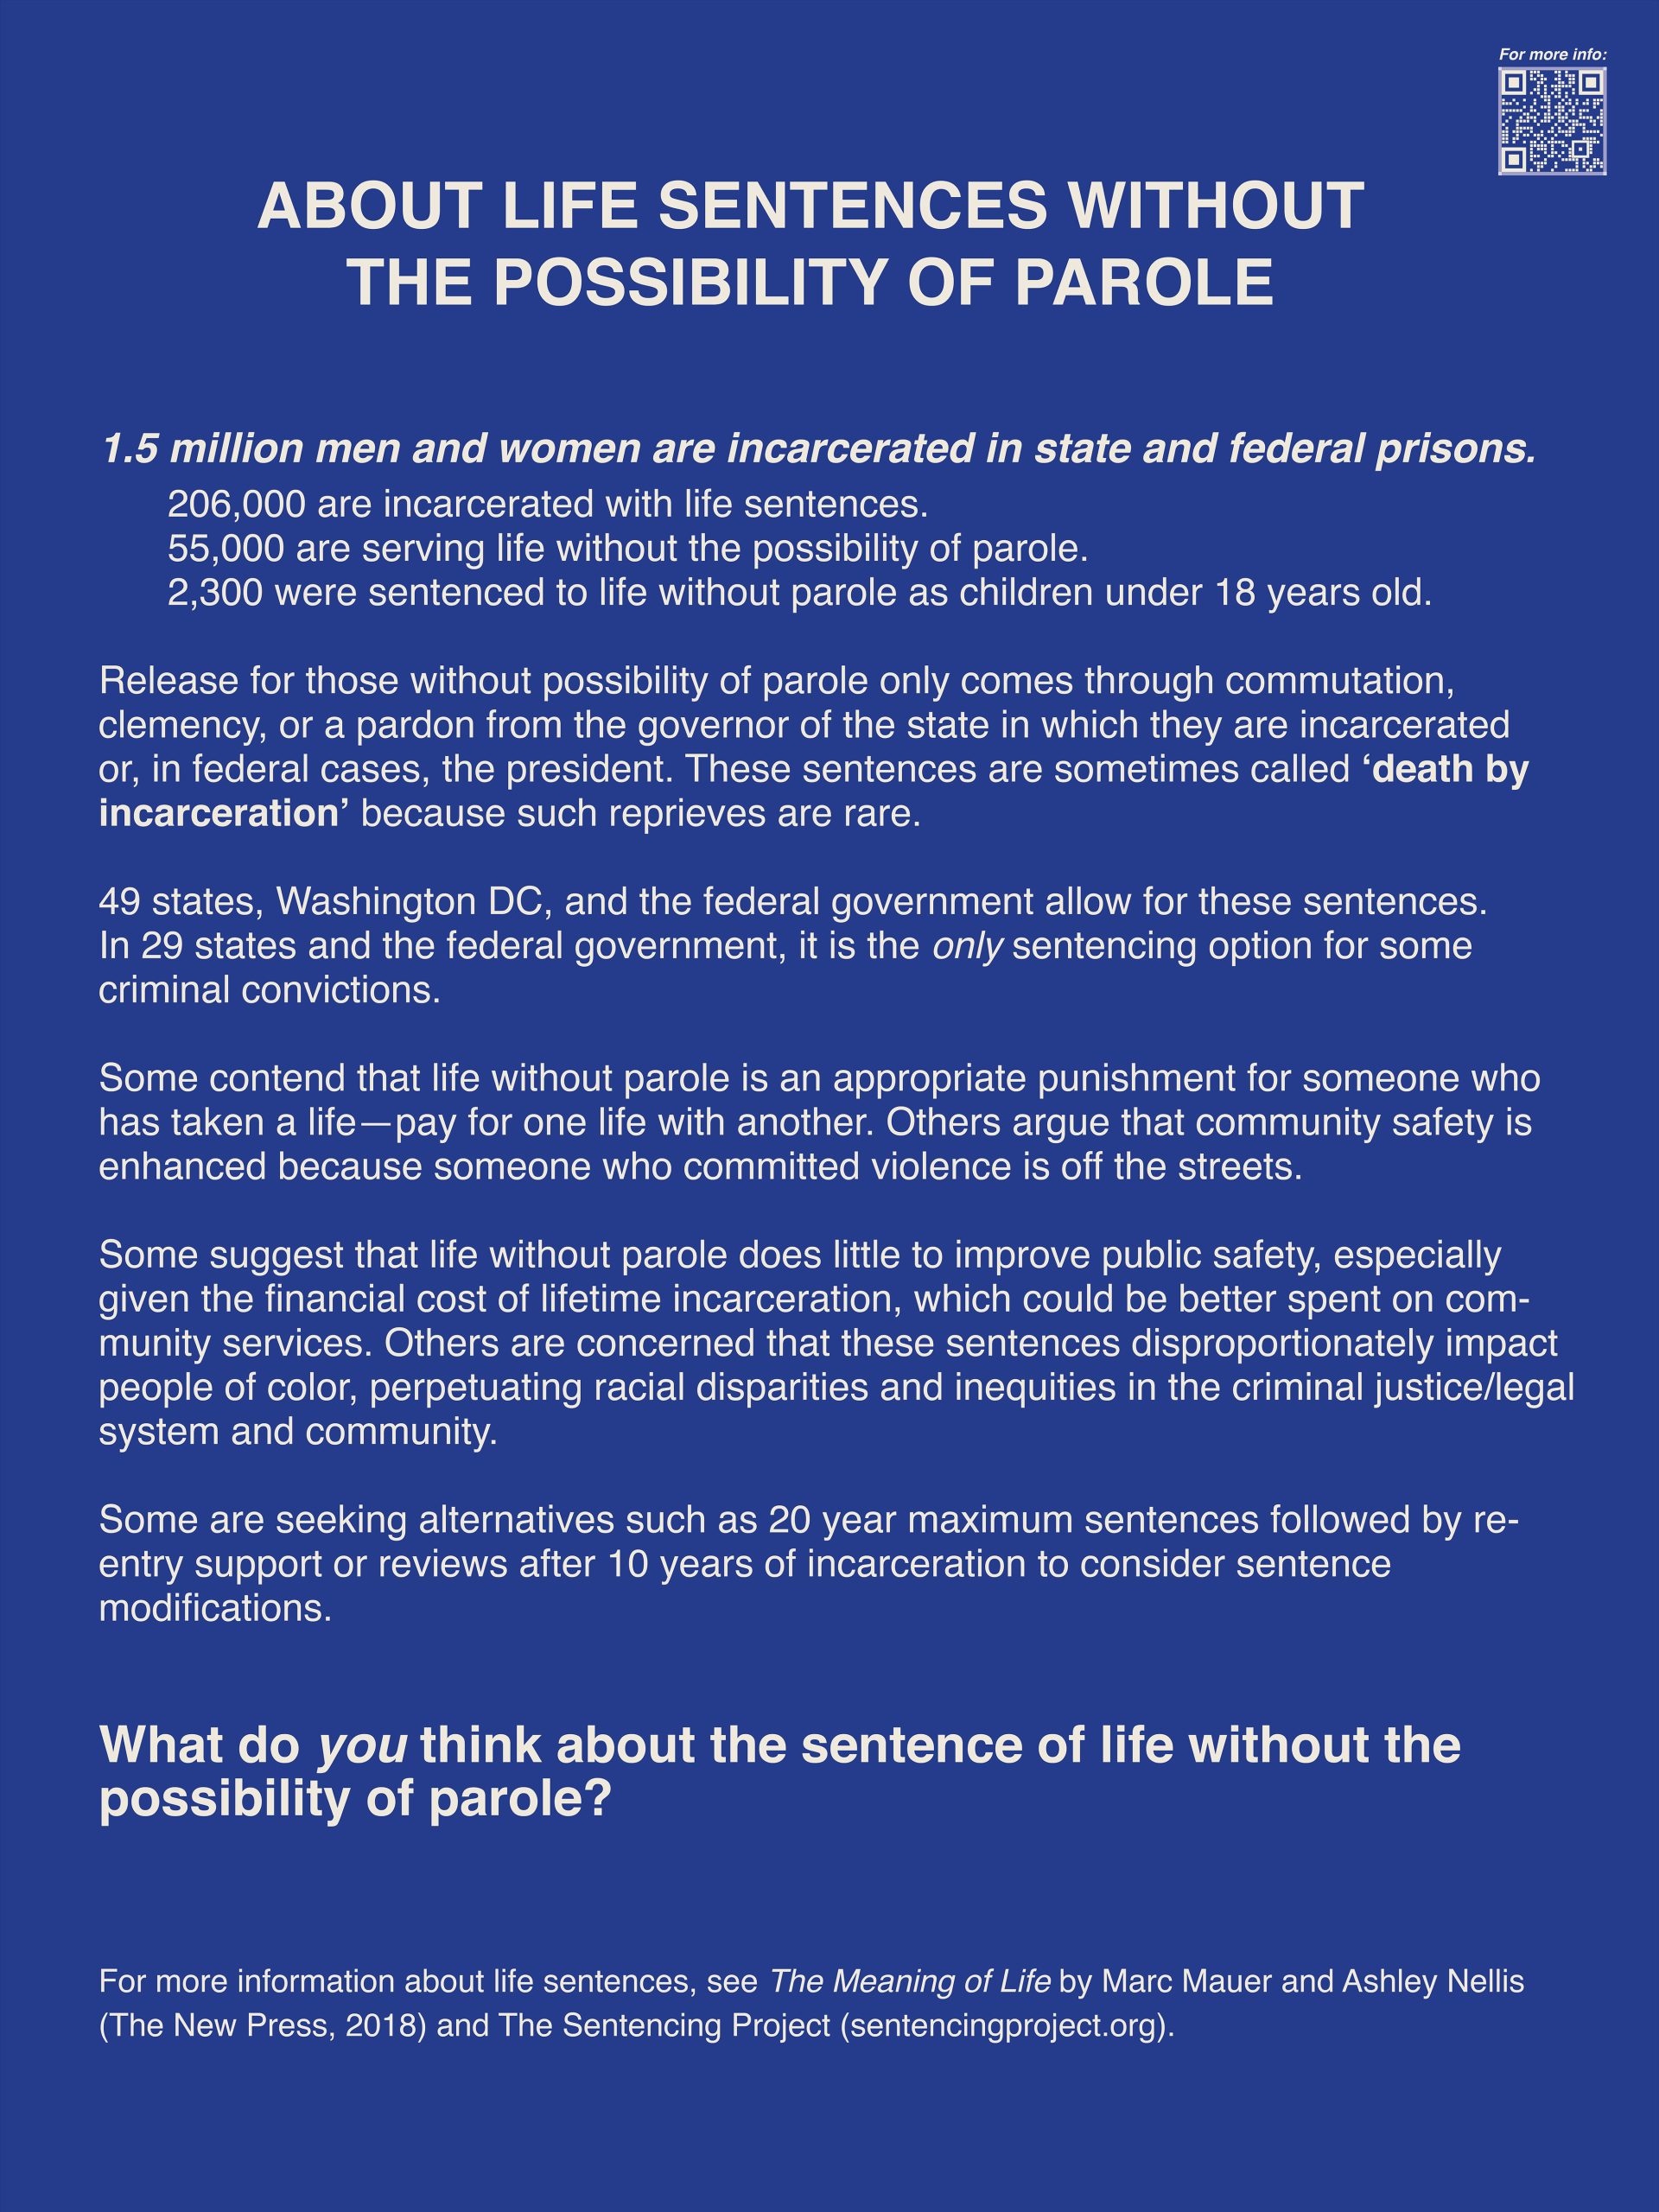 Text panel with white text against a blue background giving information about life sentences without the chance of parole.